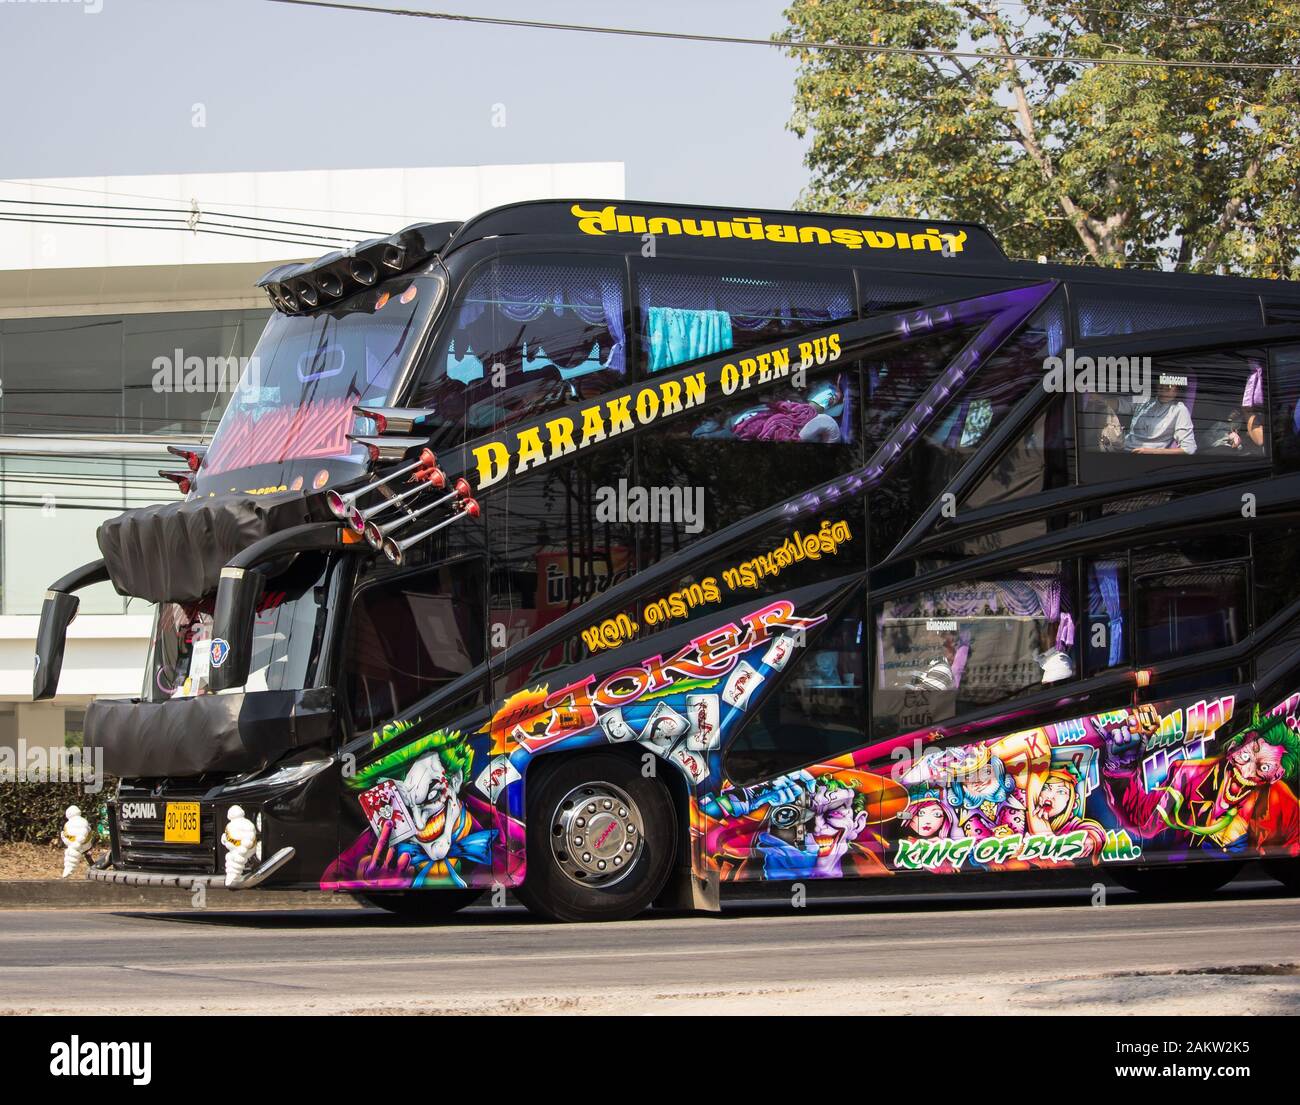 Chiangmai, Thailand - January 9 2020: Travel Bus of Daragron Transport  Company. Photo at road no 1001 about 8 km from downtown Chiangmai, thailand  Stock Photo - Alamy